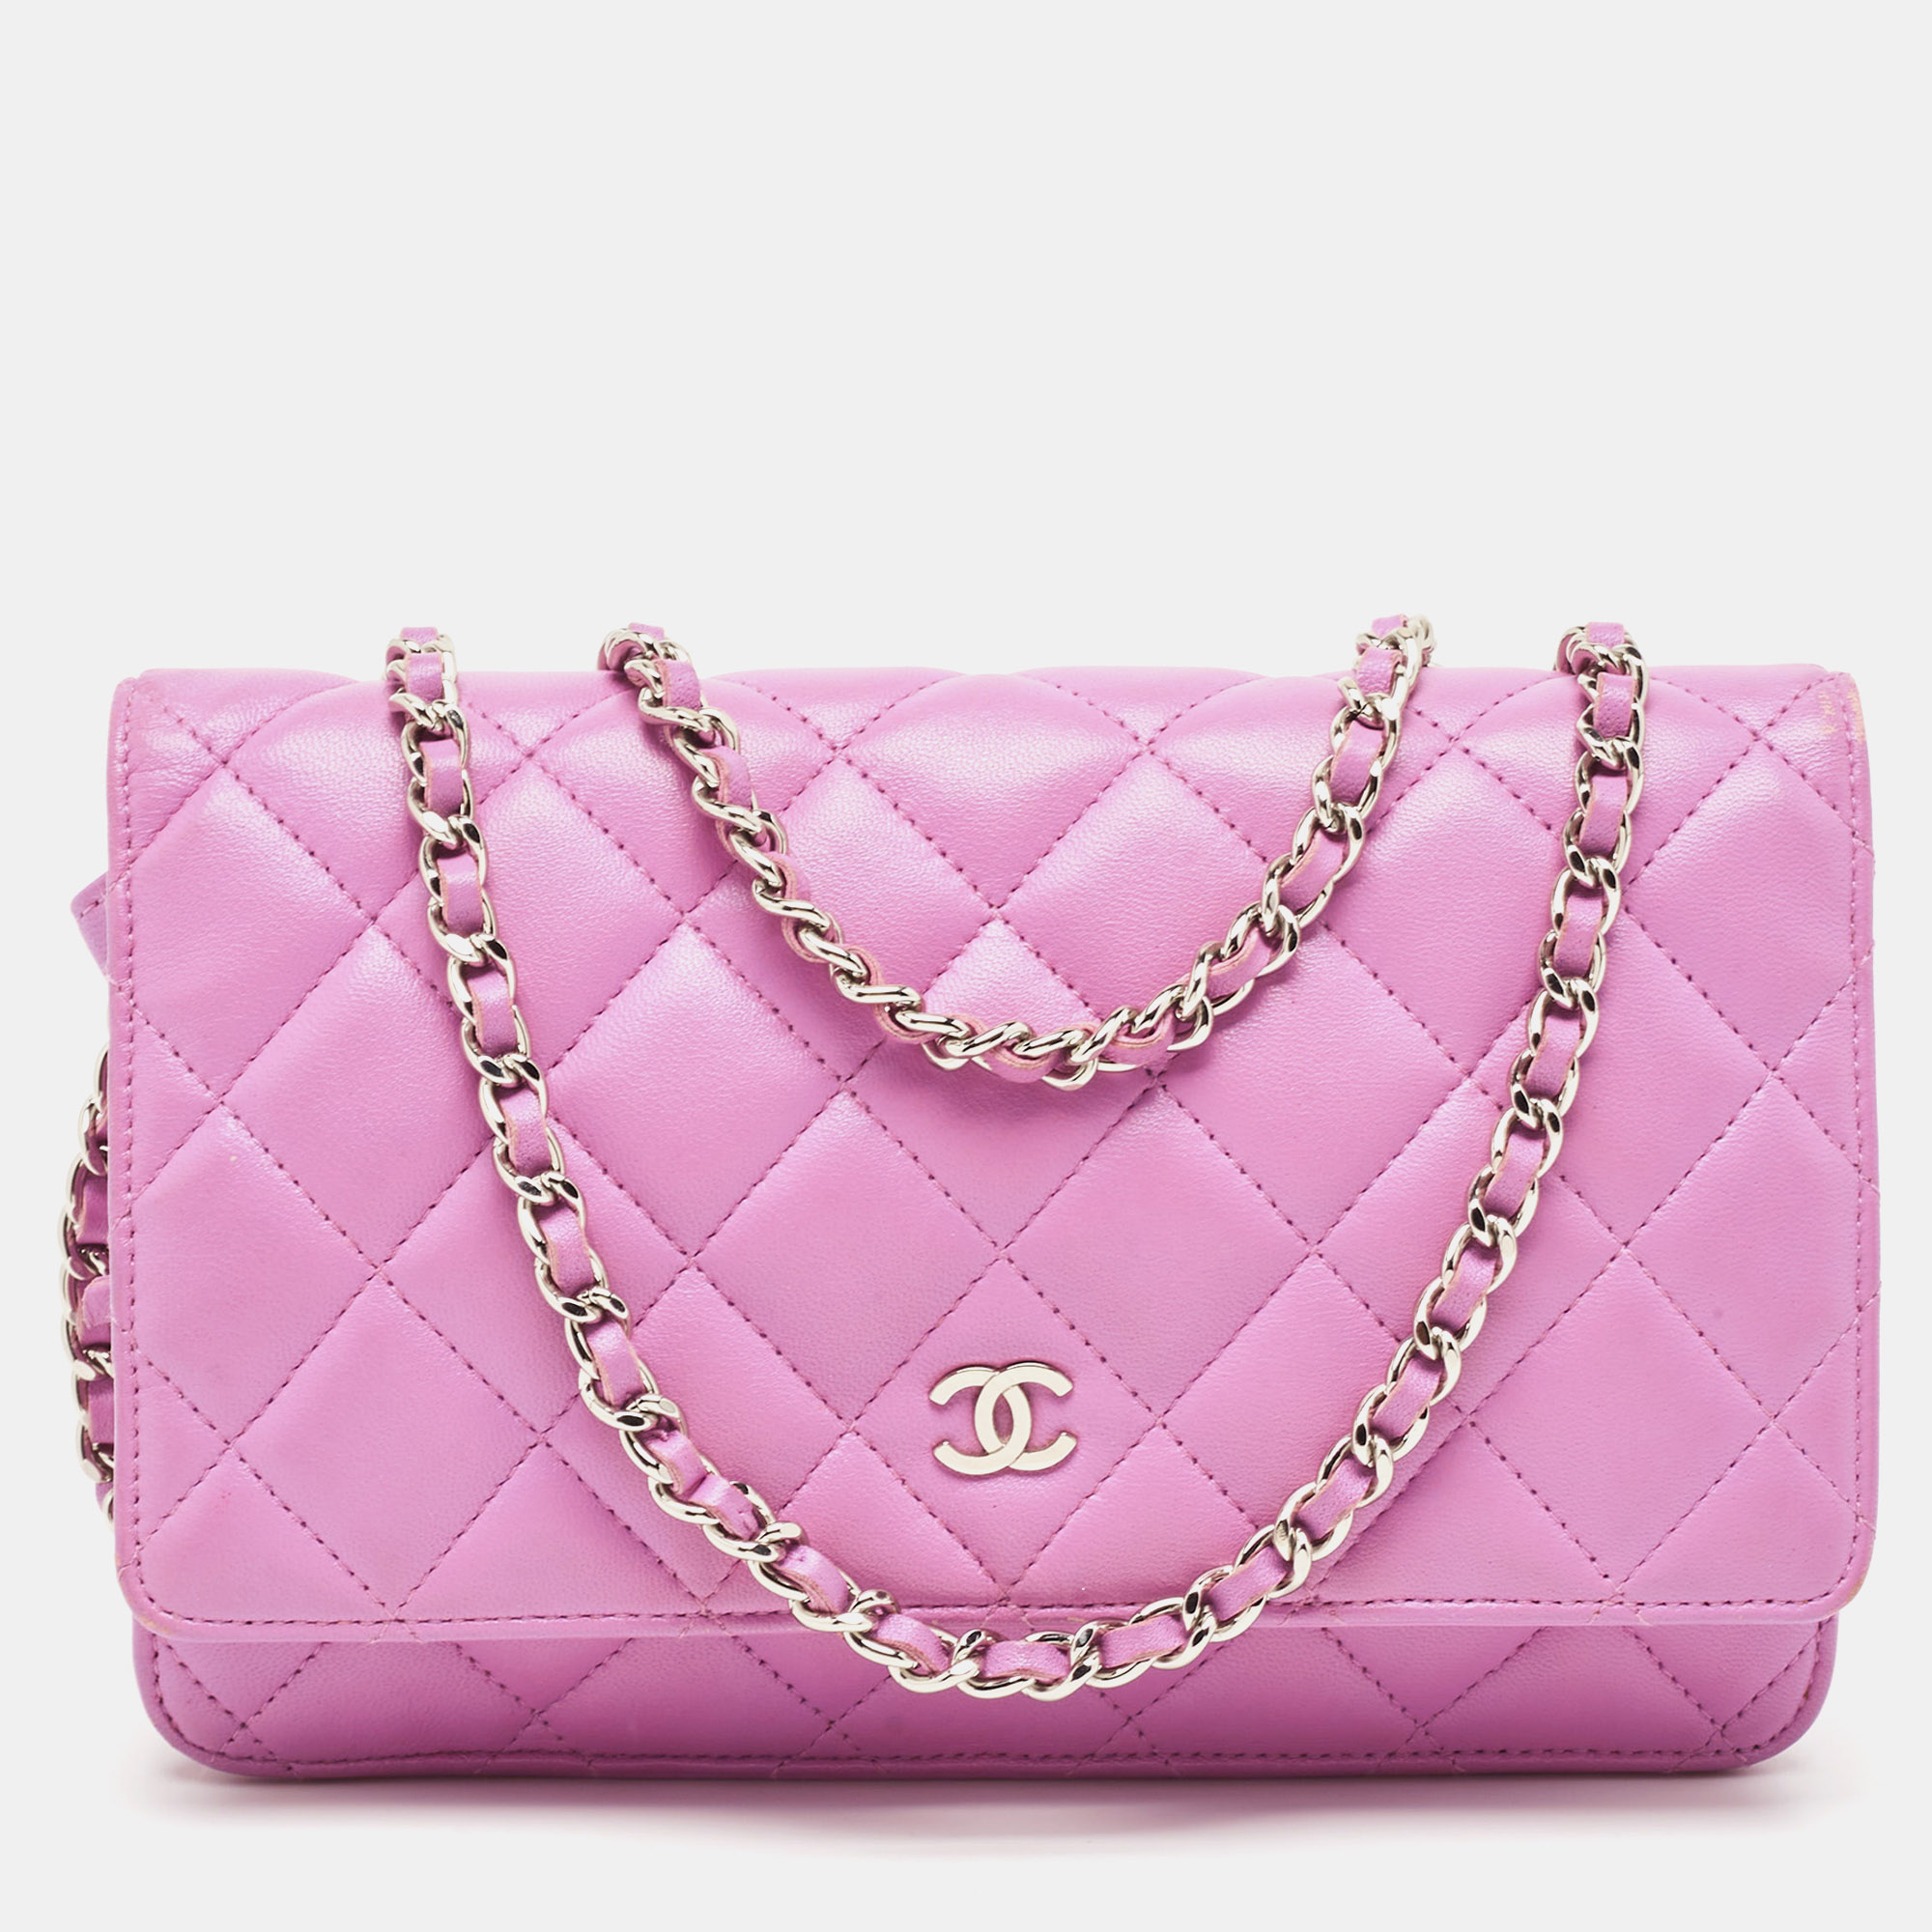 Pre-owned Chanel Purple Quilted Leather Woc Bag